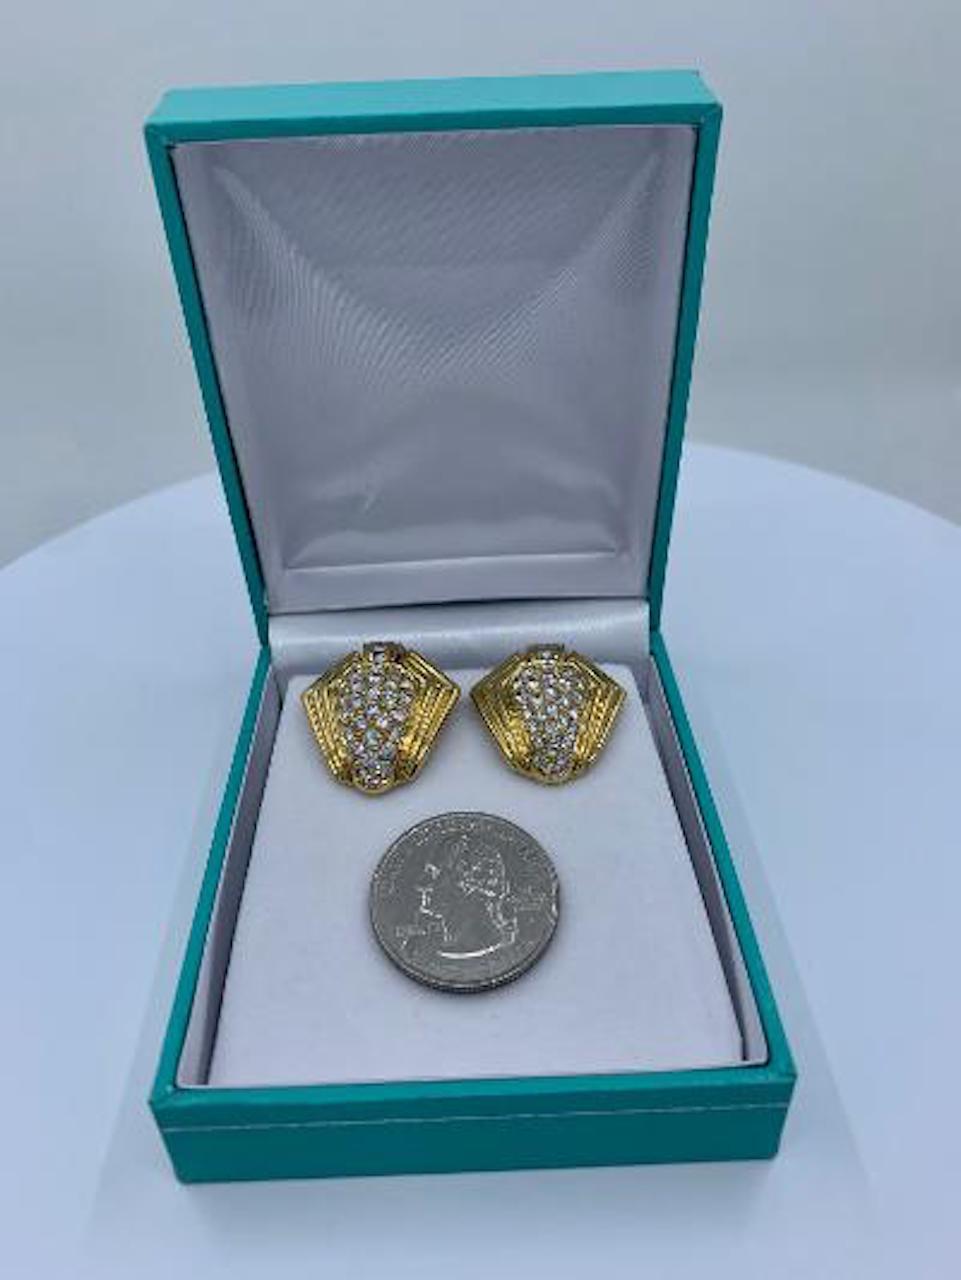 Art Deco Style 6.5 Carat VVS1 F Color Diamond Earrings in 18 Karat Yellow Gold In Excellent Condition For Sale In Tustin, CA